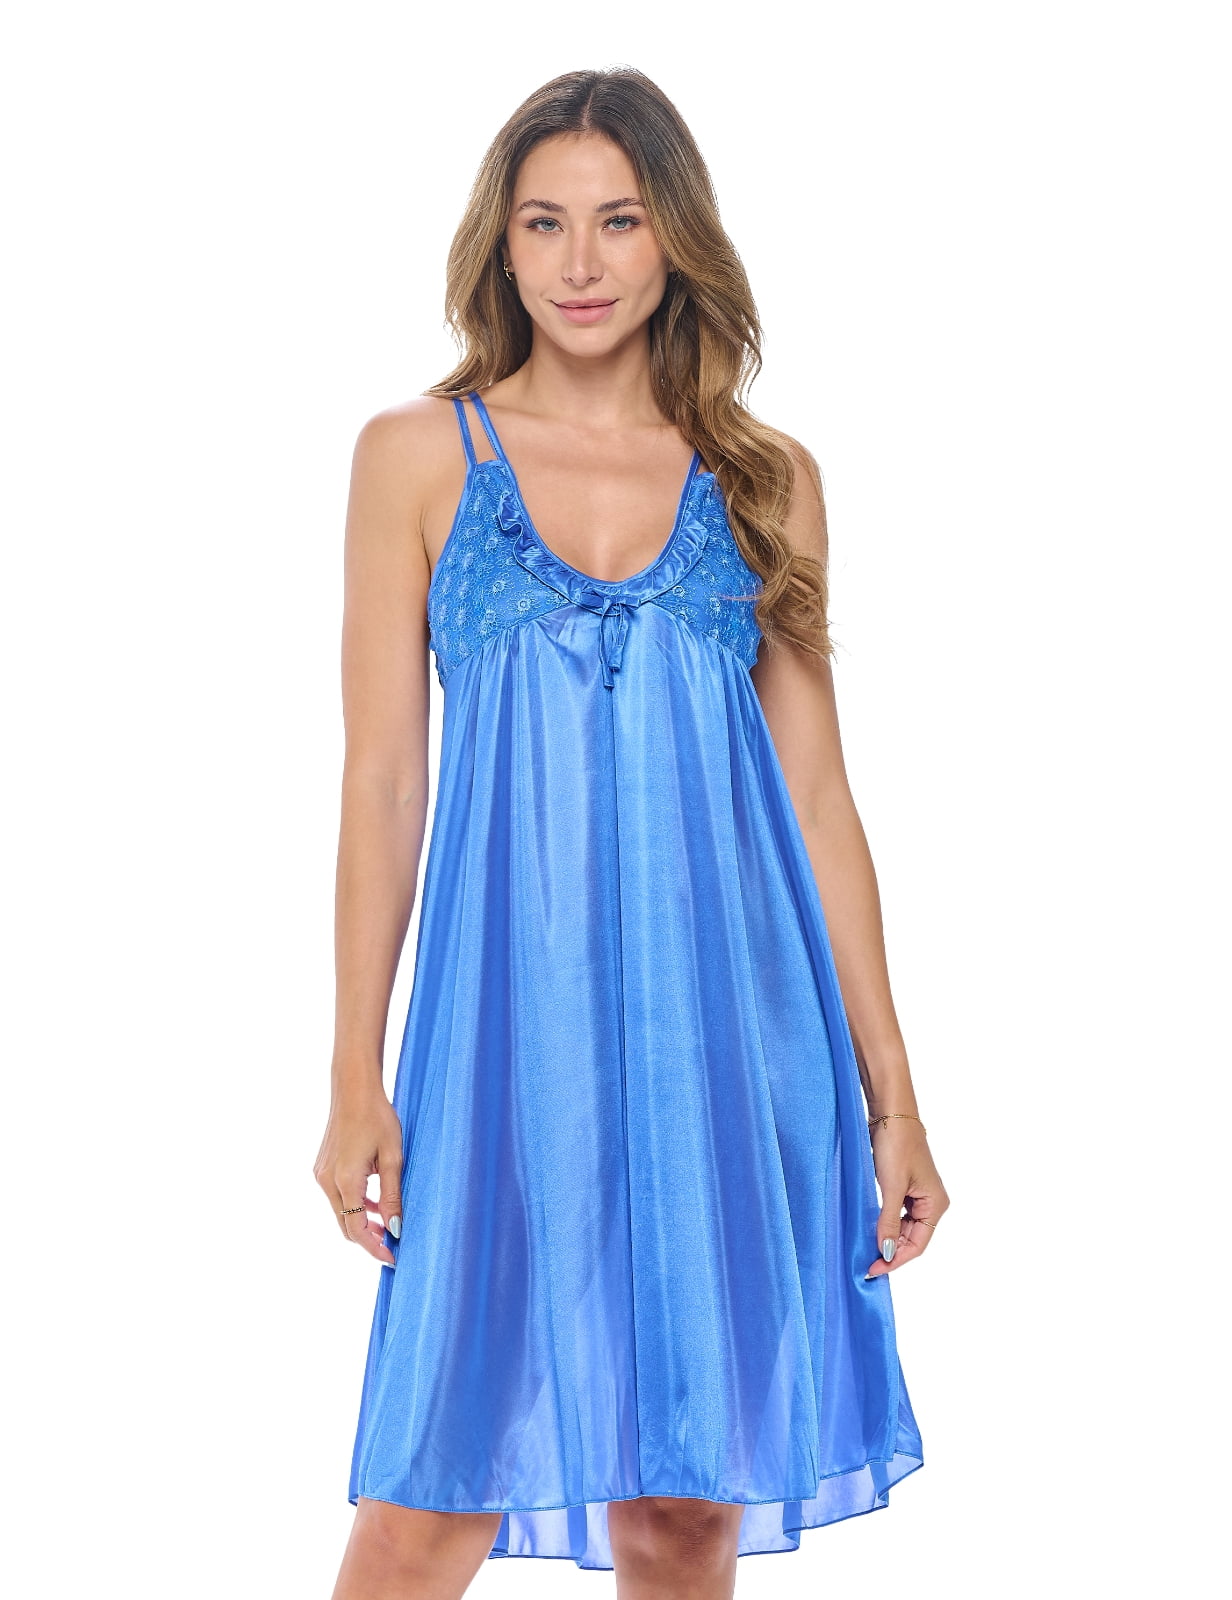 Casual Nights Women's Satin Lace Camisole Nightgown - Walmart.com